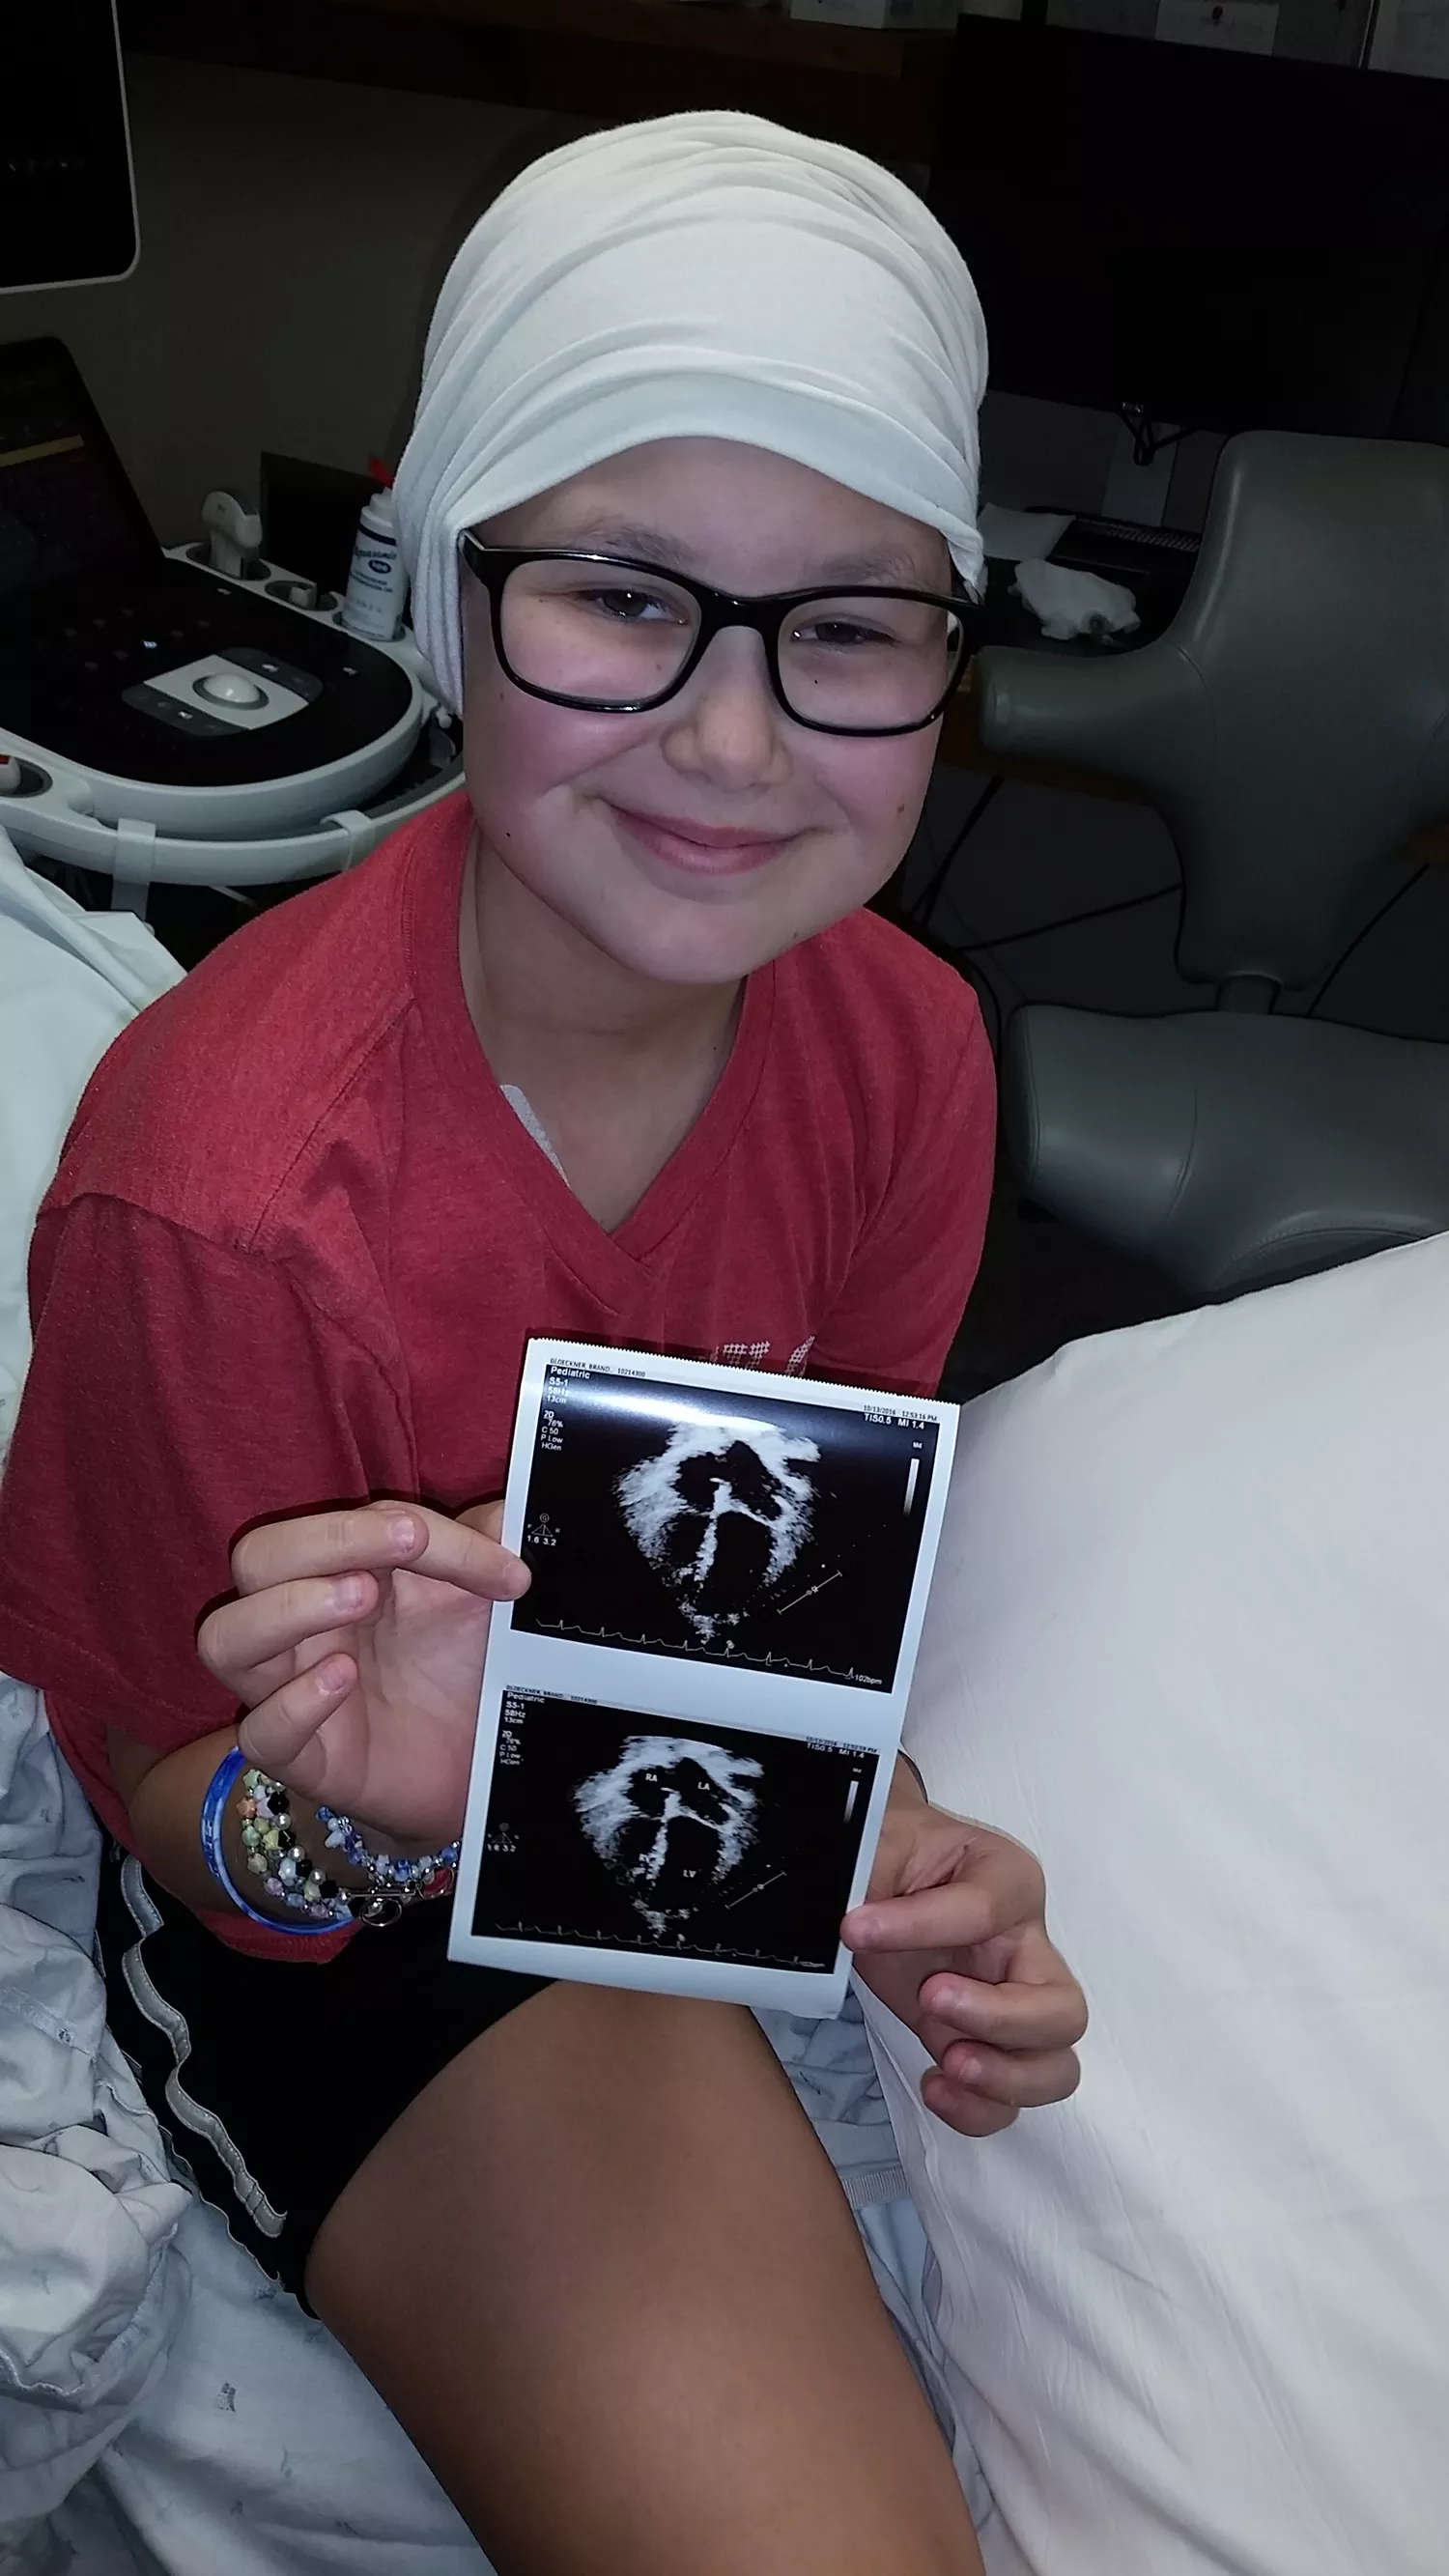 Brandi holds a photo of her scans